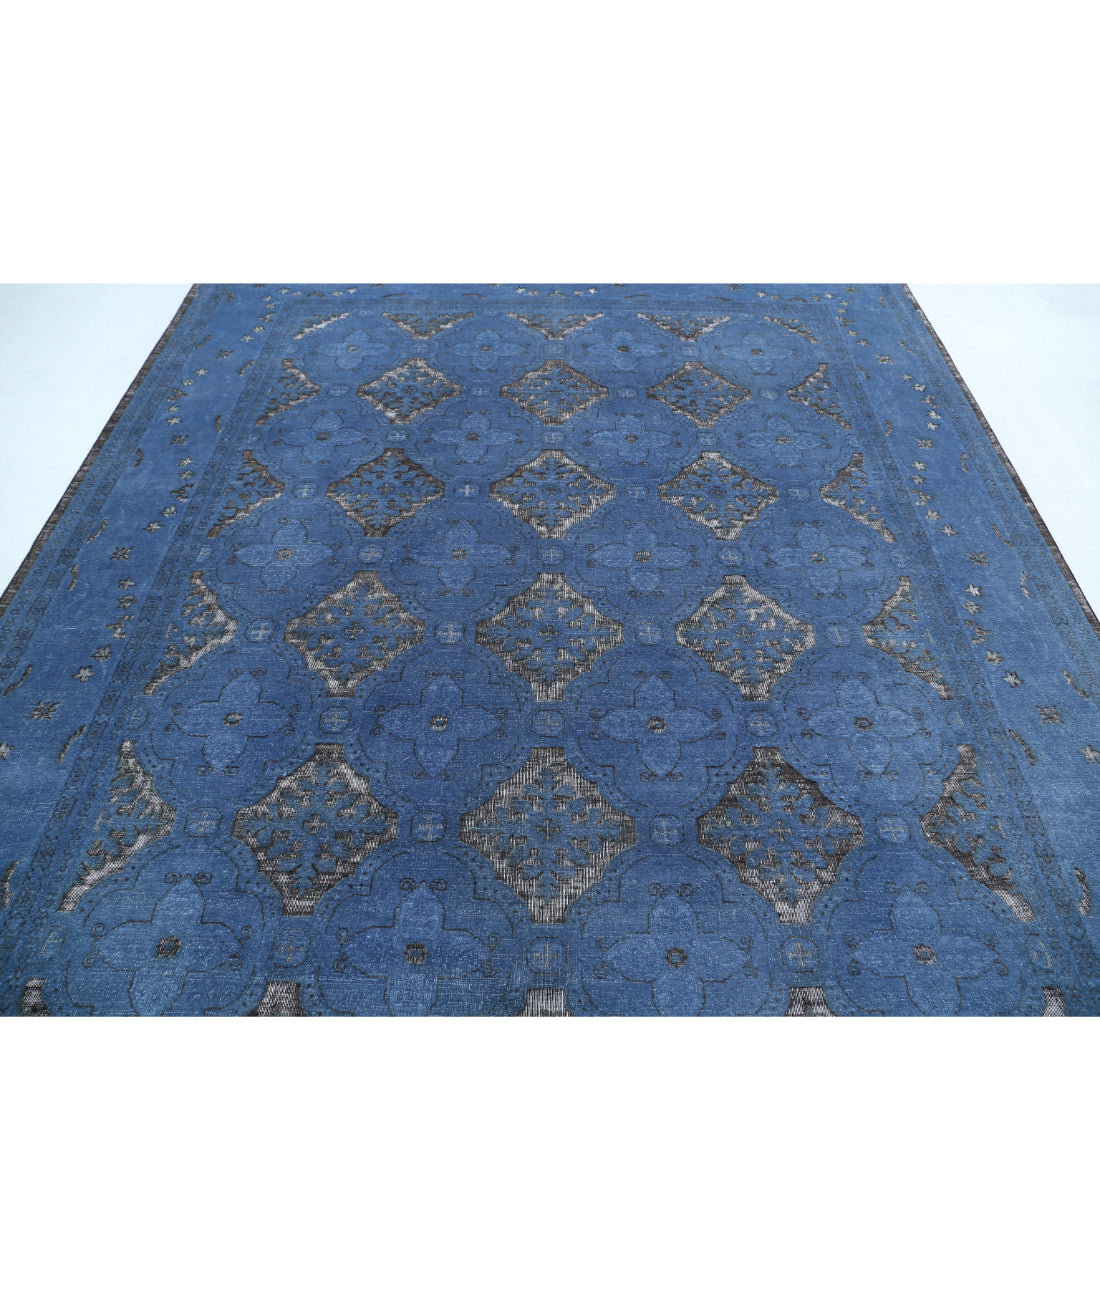 Hand Knotted Onyx Wool Rug - 8'1'' x 9'9'' 8'1'' x 9'9'' (243 X 293) / Blue / Blue